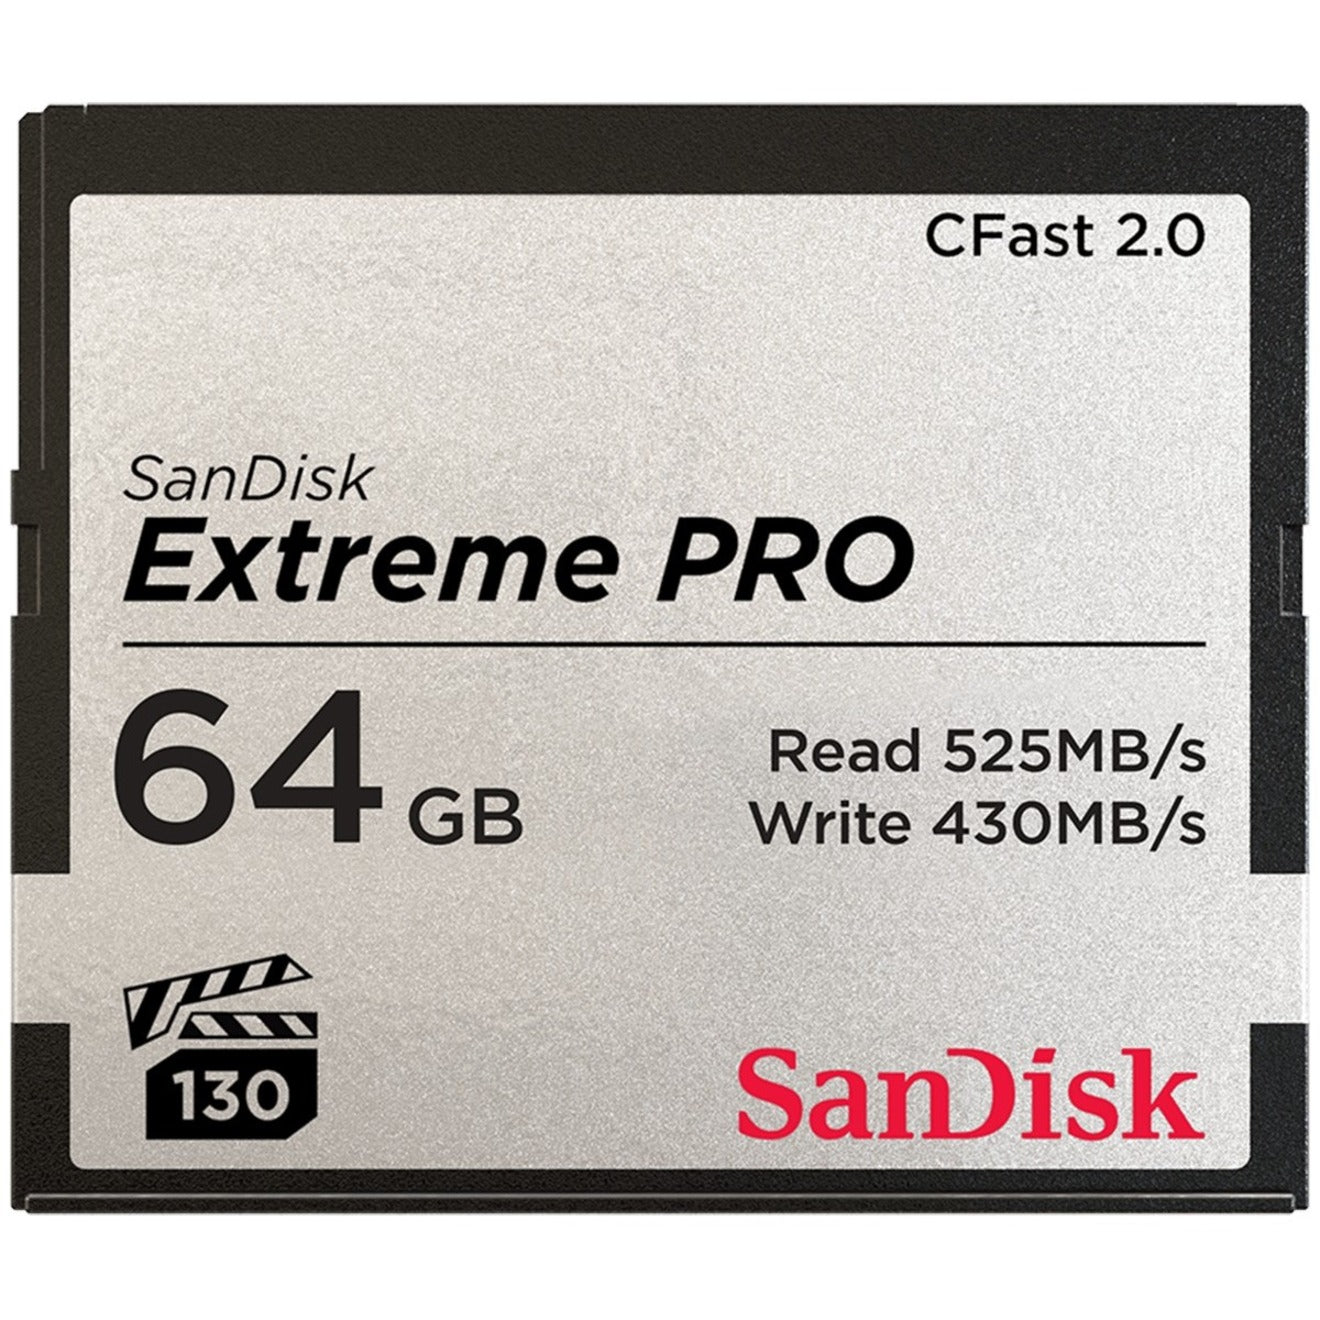 SanDisk SDCFSP-064G-A46D Extreme Pro CFast 2.0 Memory Card - 64GB, High-Speed Performance for Professional Photography and Videography